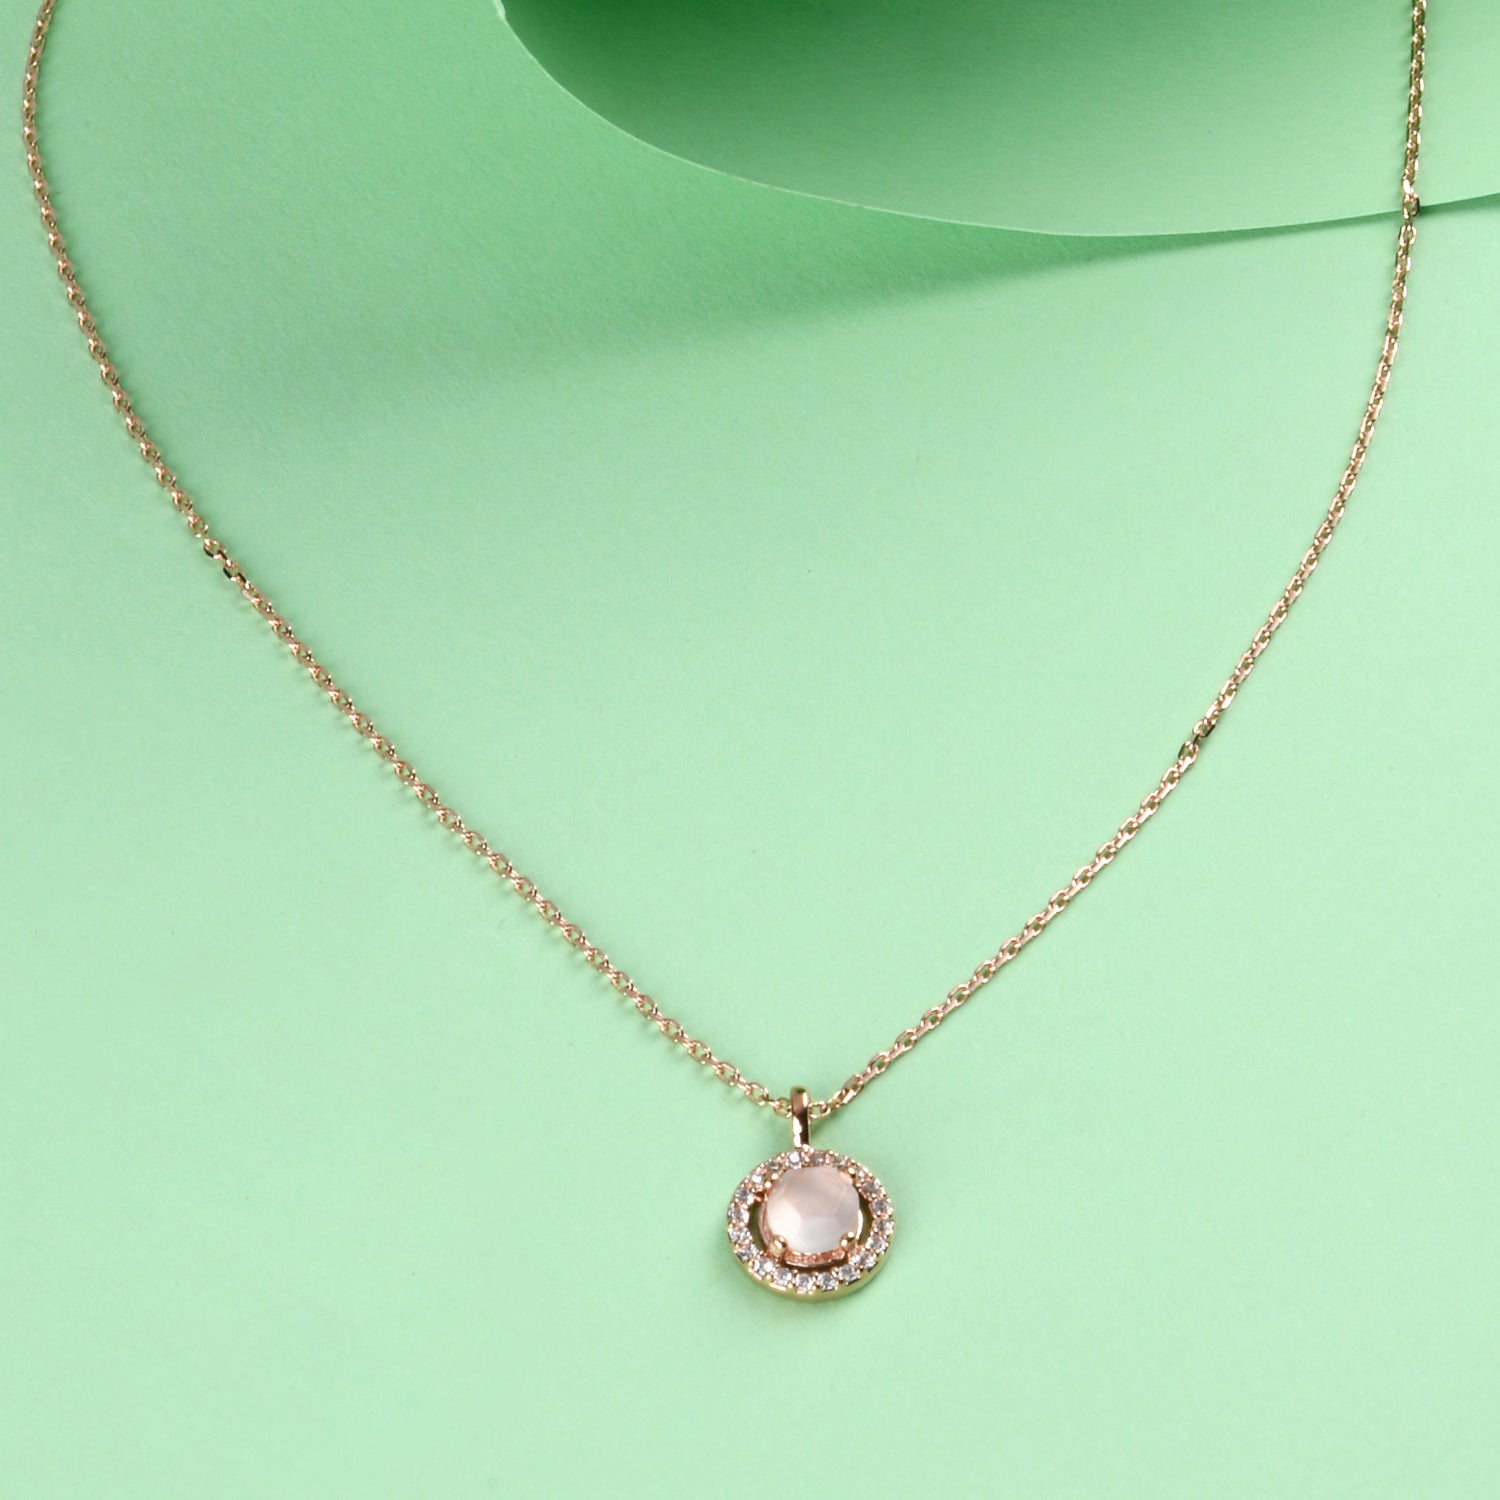 Real Gold Plated Rose Quartz Halo Pendant Necklace For Women By Accessorize London